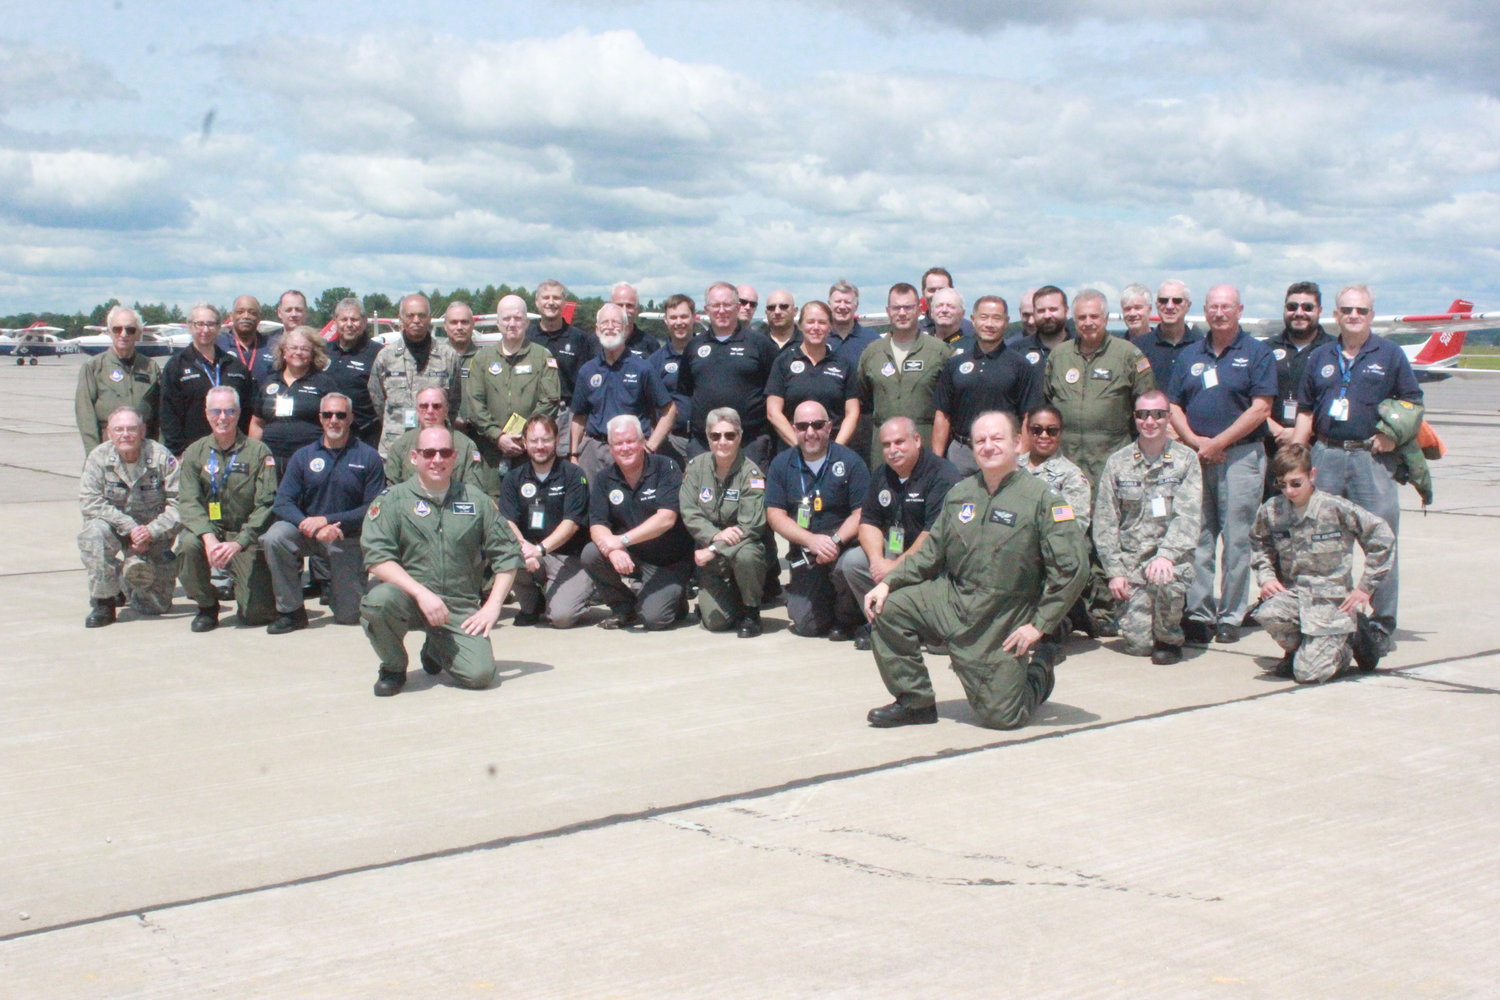 REPORTING IN — Aircraft and crew gather for a group photo prior to a large-scale disaster relief training exercise held in August at the Griffiss International Airport earlier this year.